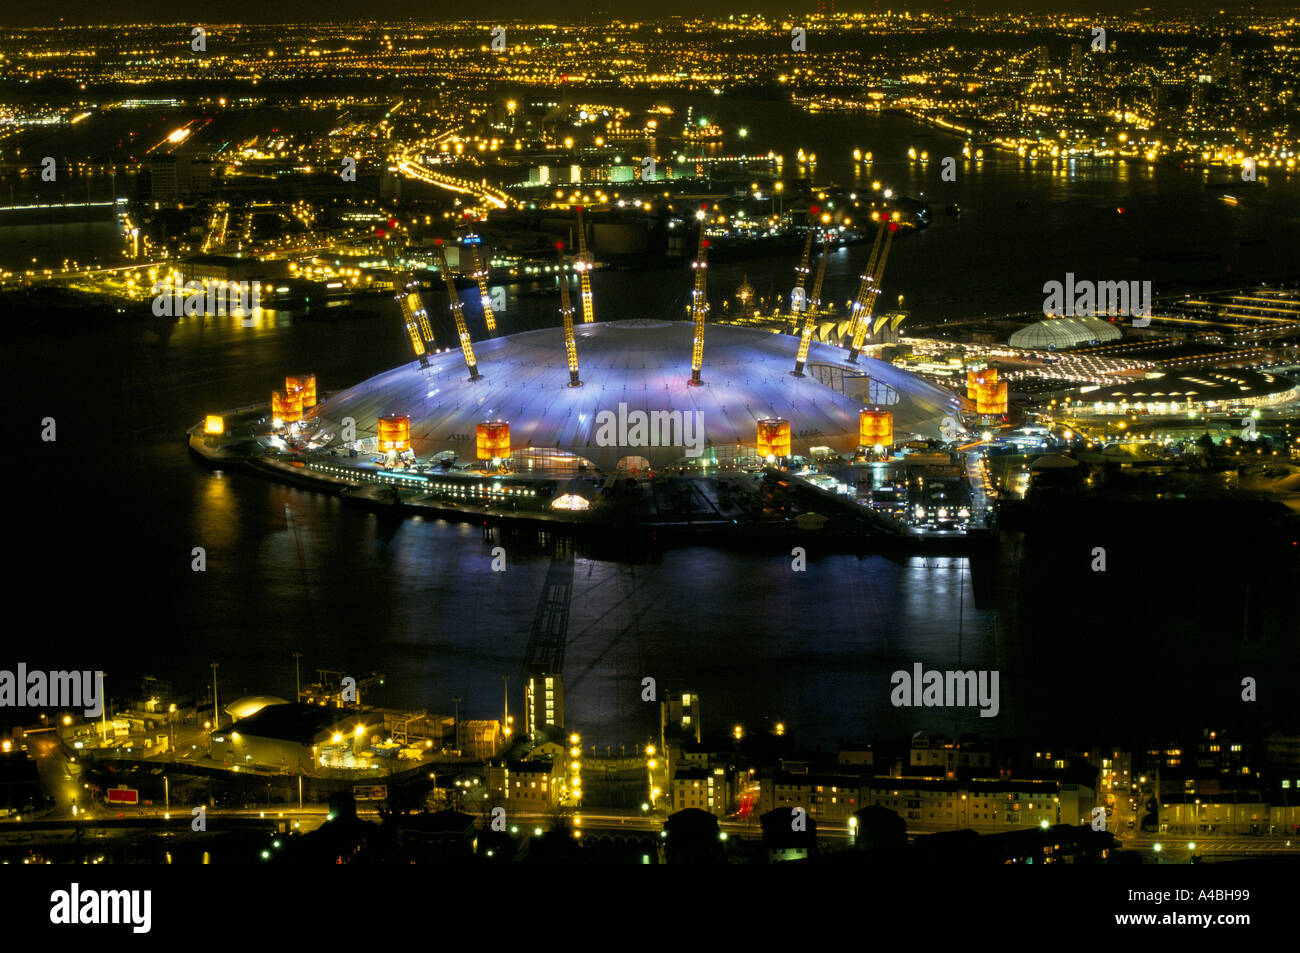 Aerial view of the the Millennium dome at night, illuminated from within by the changing colour displays, December 1999 Stock Photo